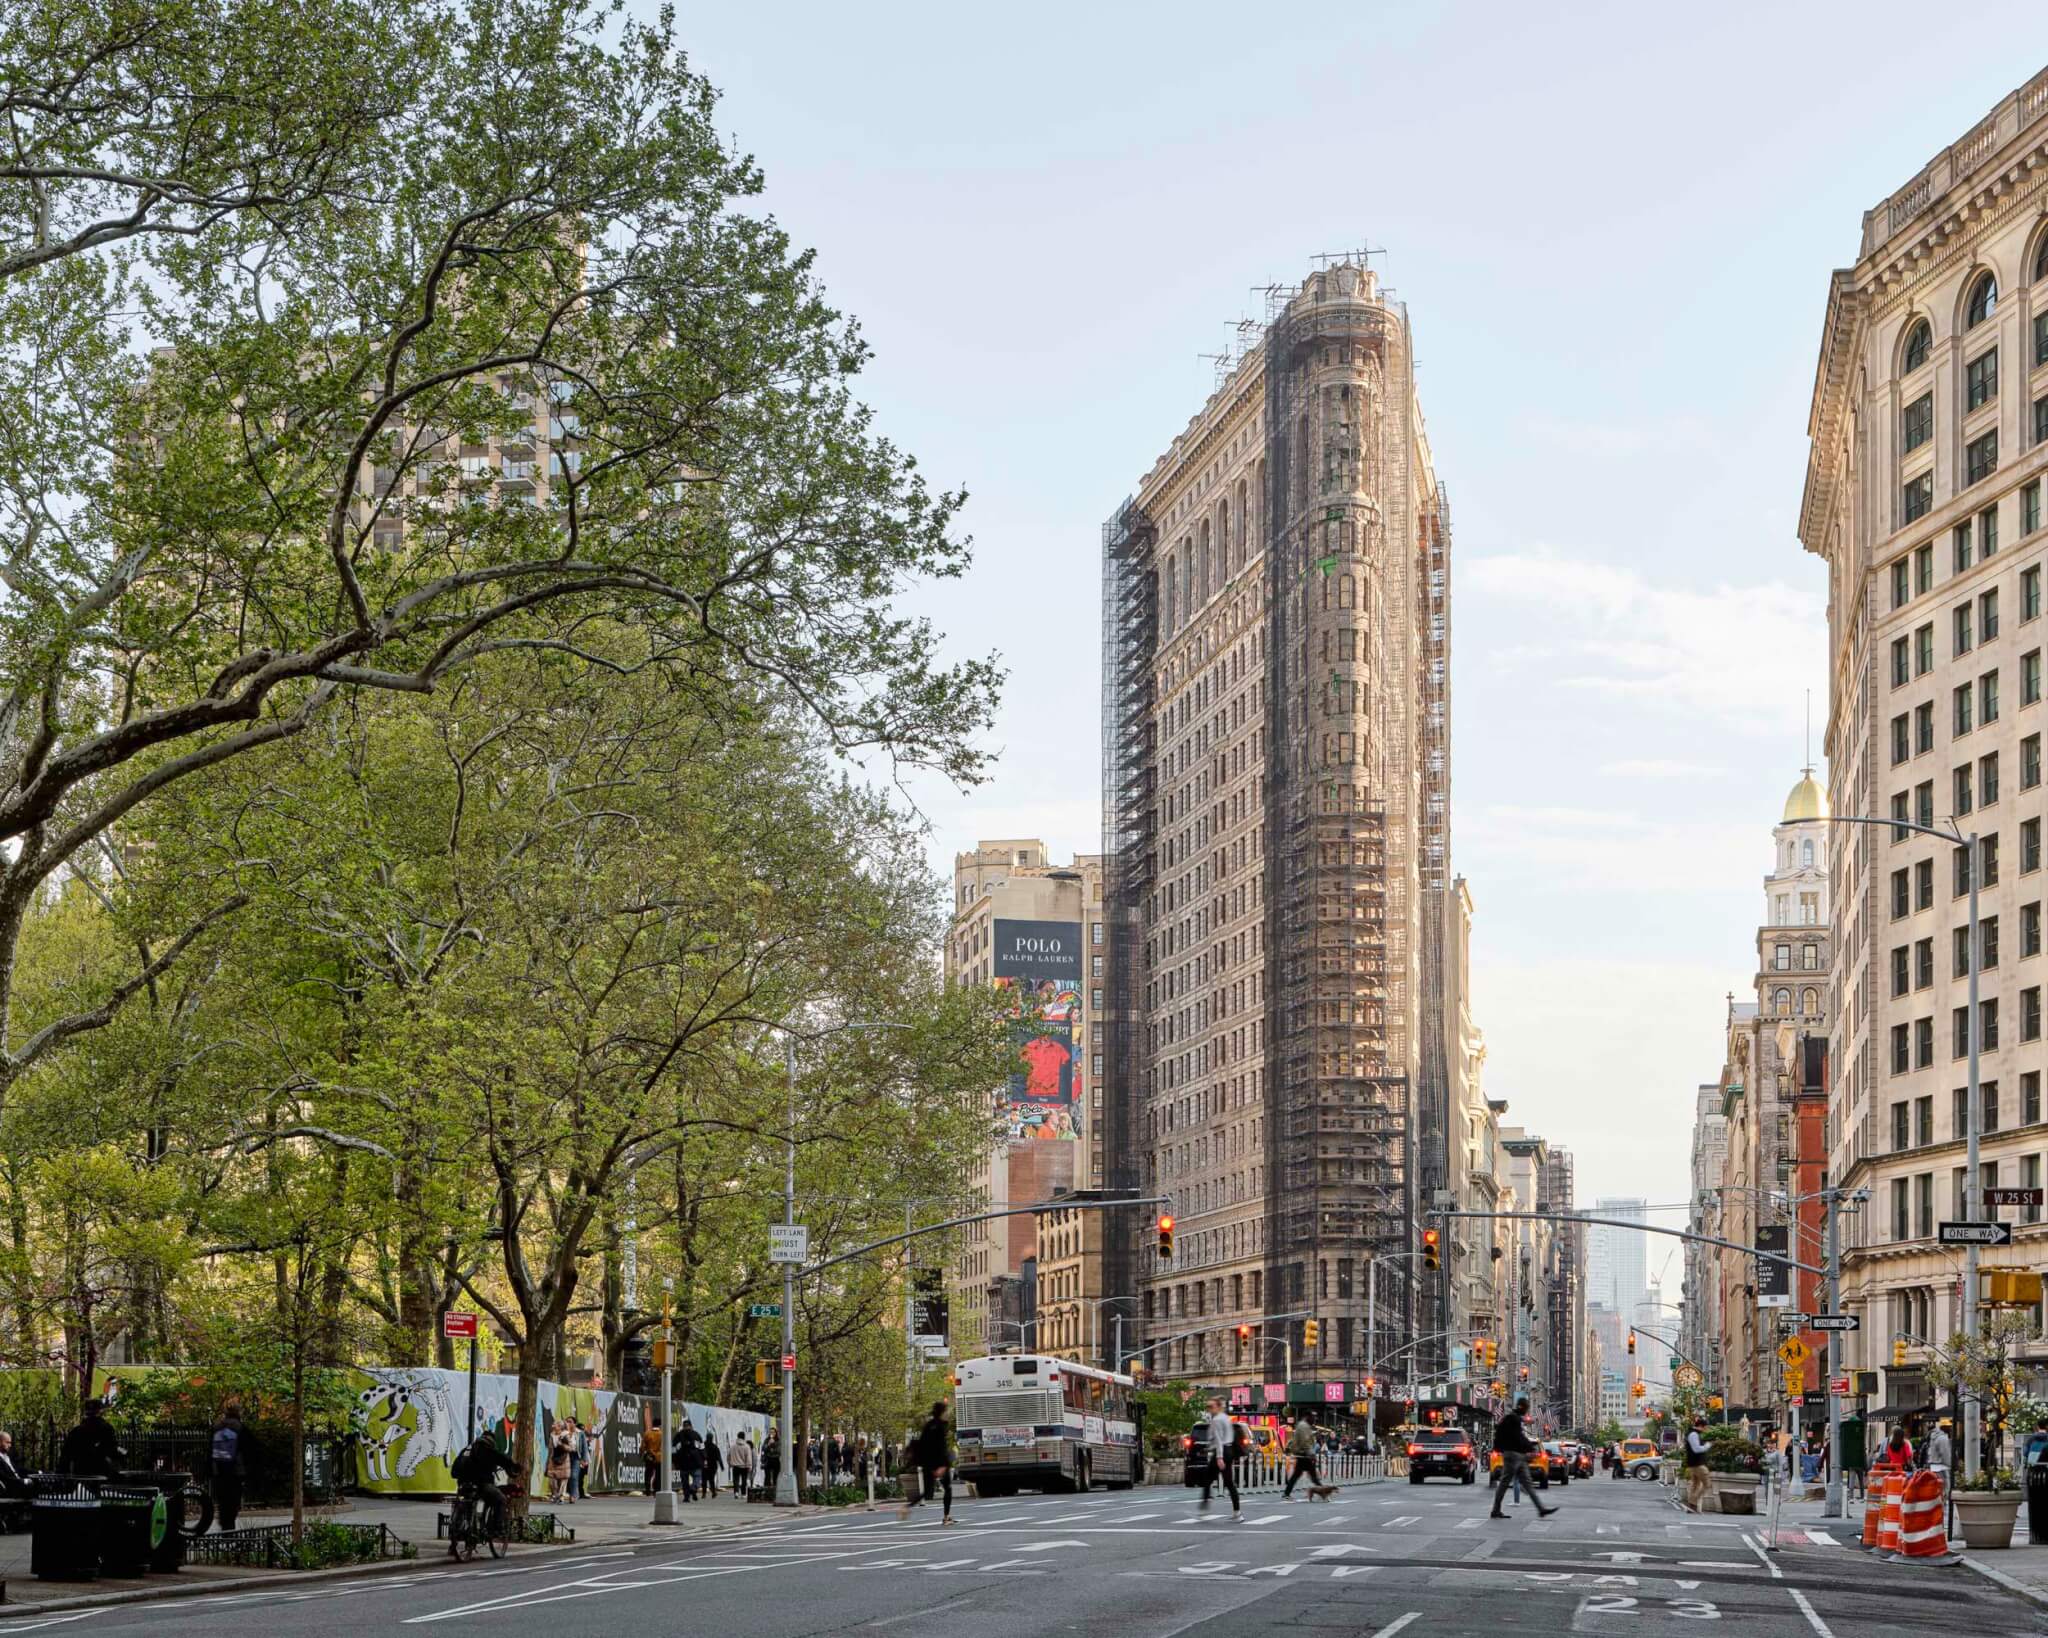 New York City's Iconic Flatiron Building Sells for $190 Million at Auction, Smart News